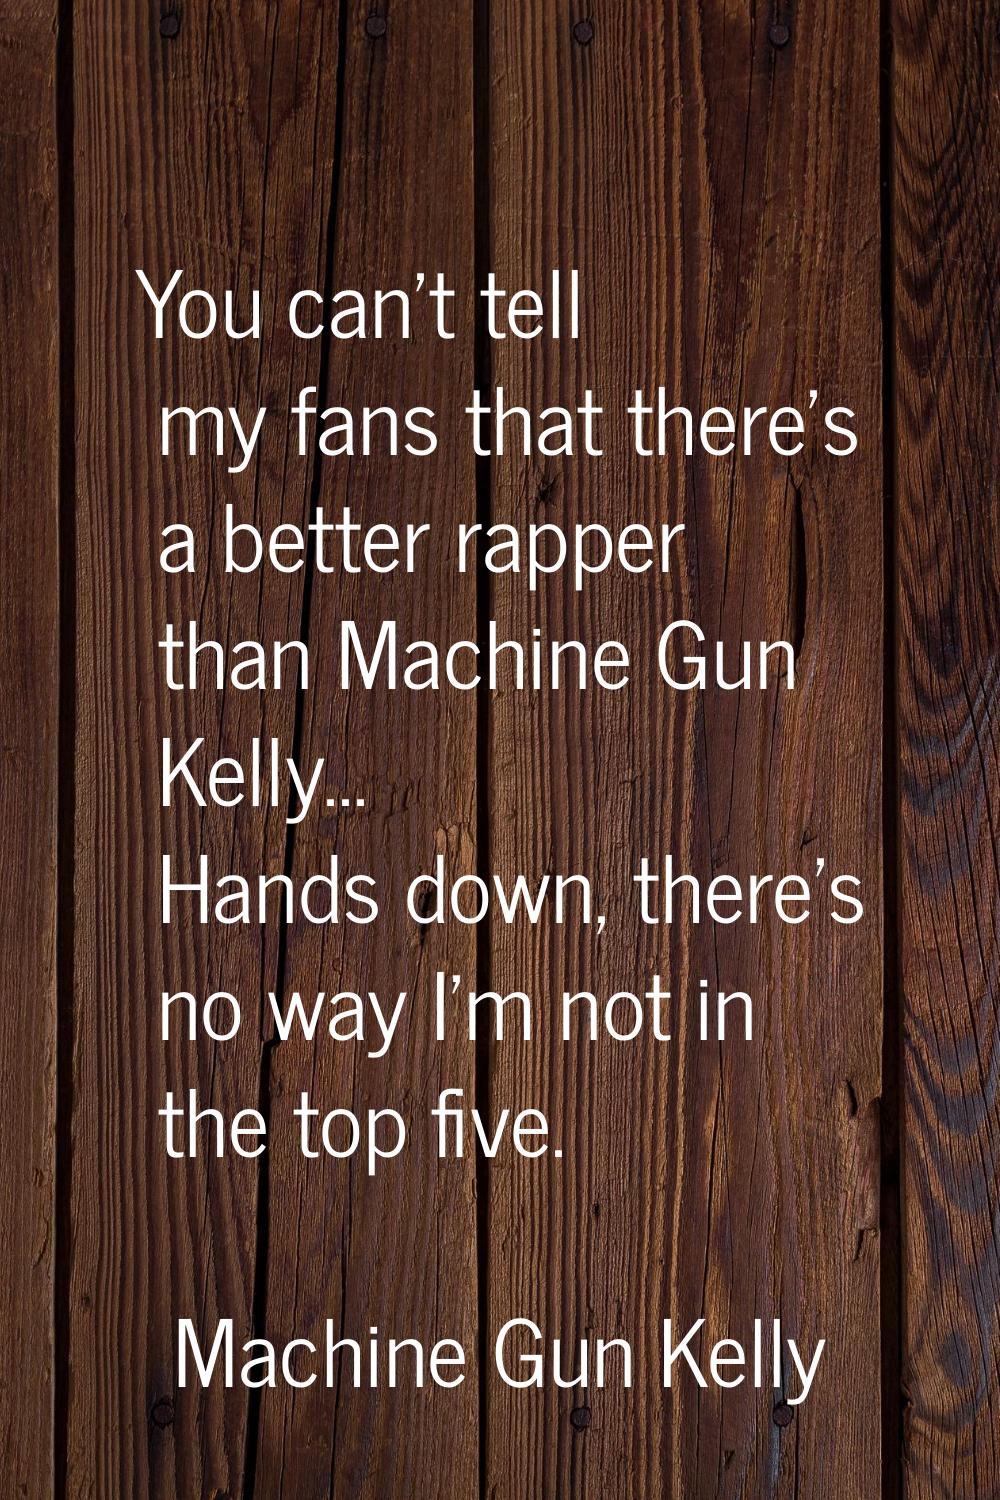 You can't tell my fans that there's a better rapper than Machine Gun Kelly... Hands down, there's n